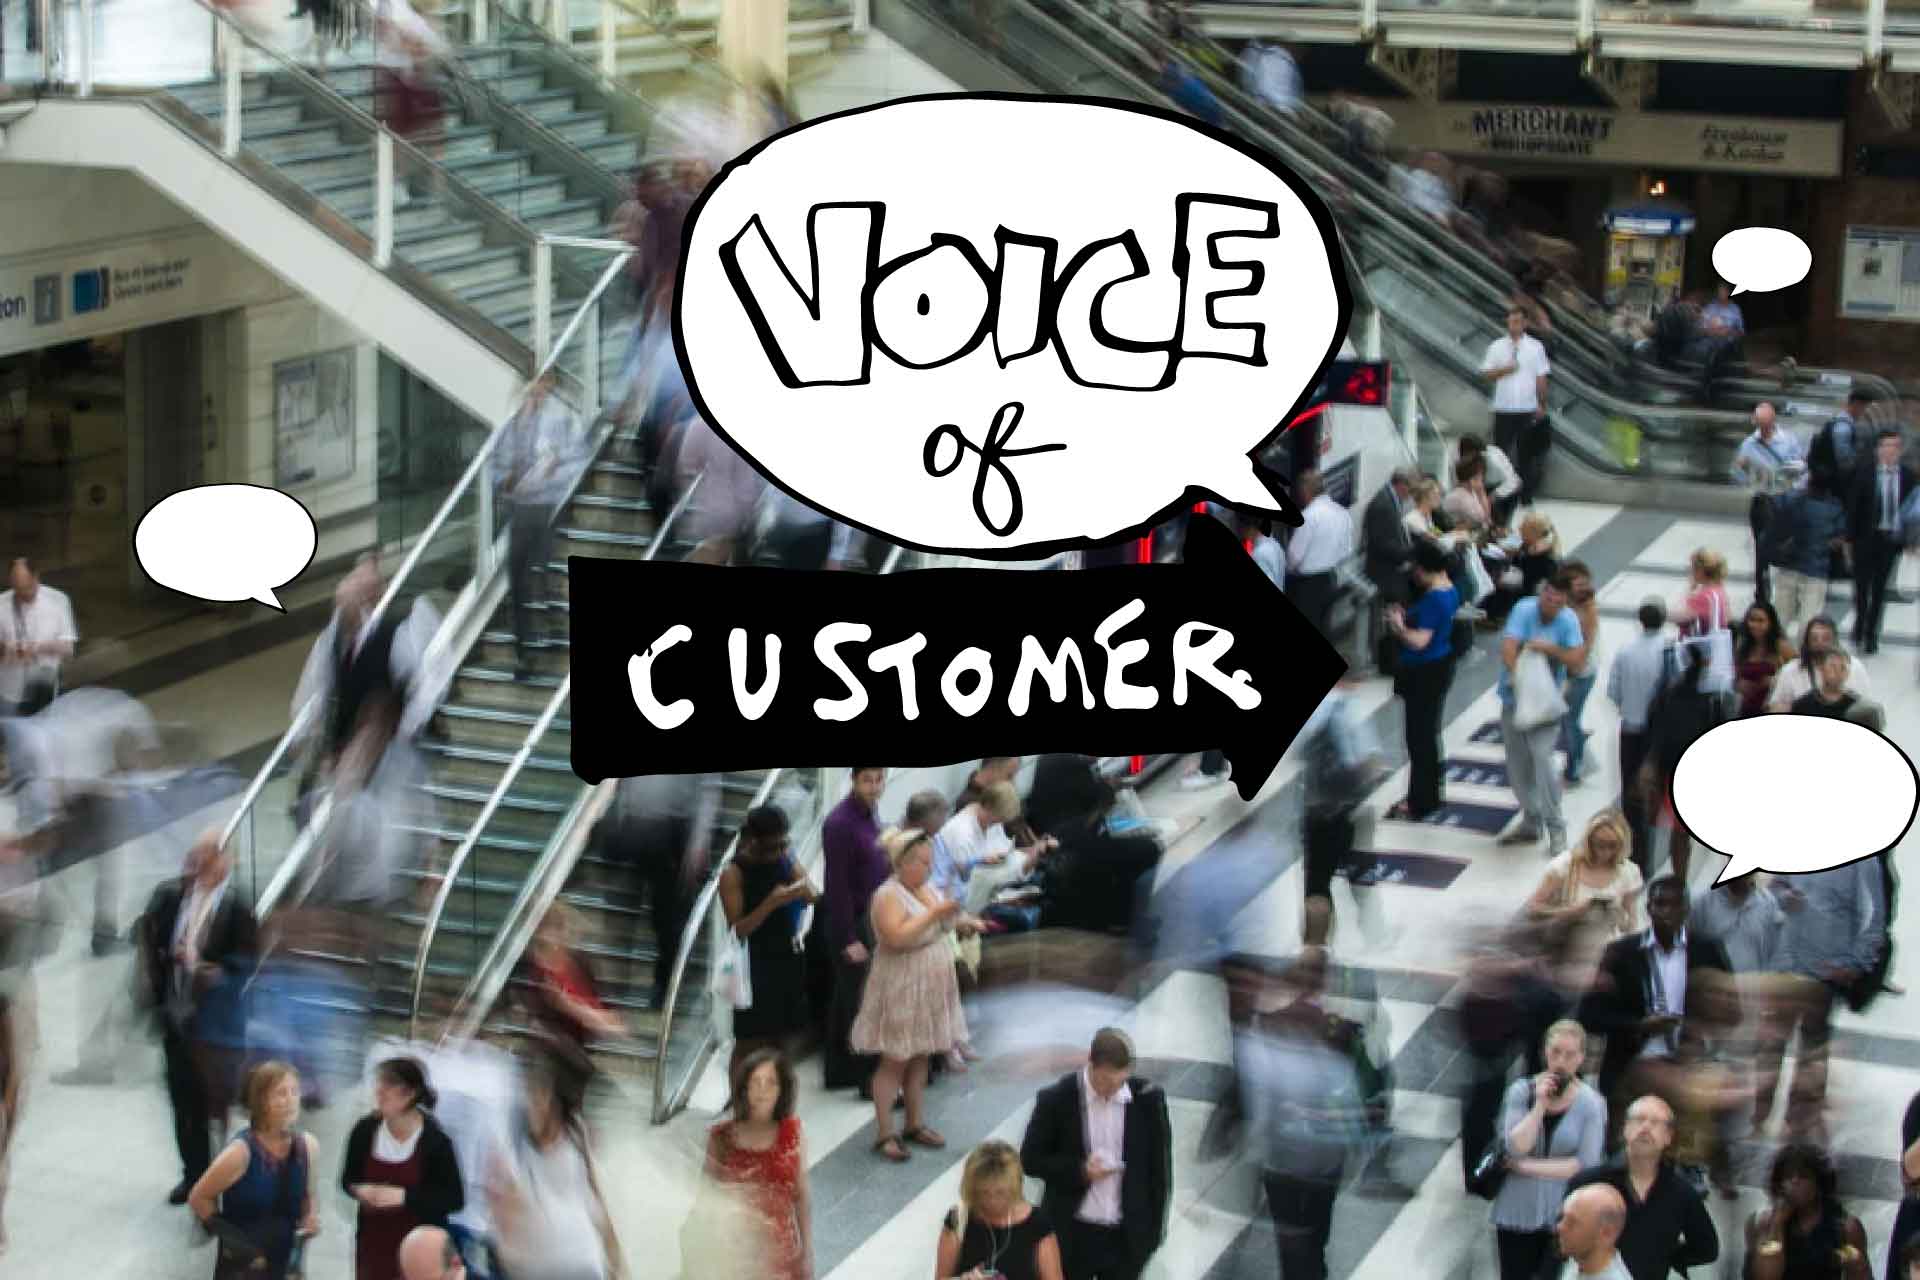 A Positive Voice of Customer